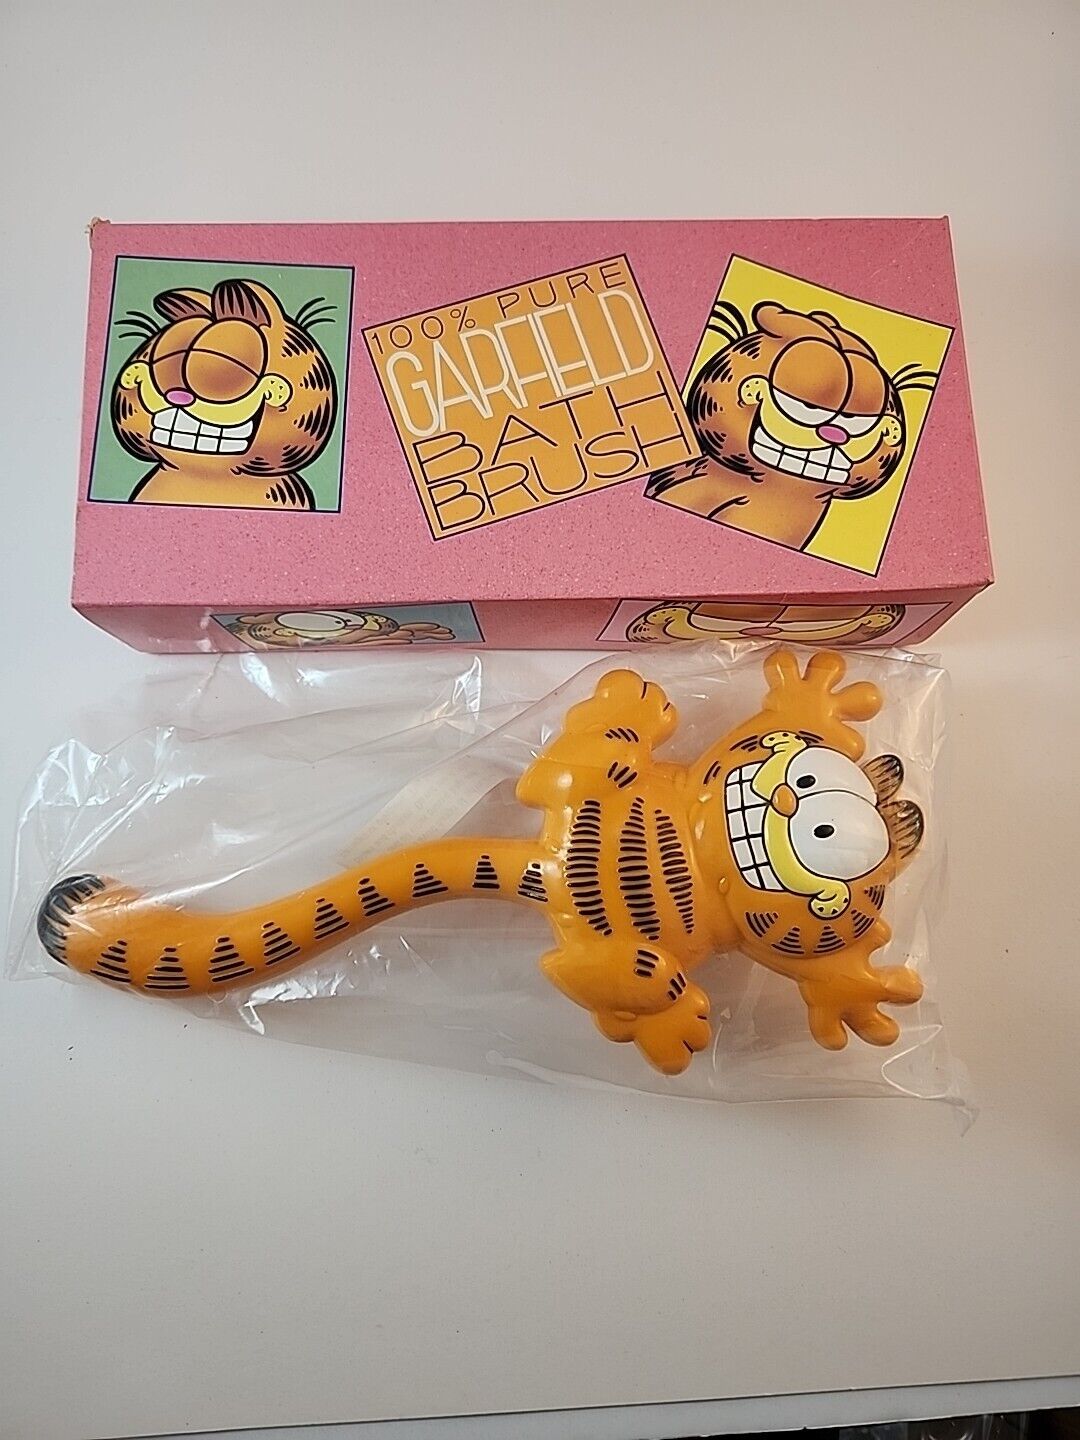 NOS AVON Vintage 1978 GARFIELD BATH BRUSH  Factory Sealed in Plastic With Box